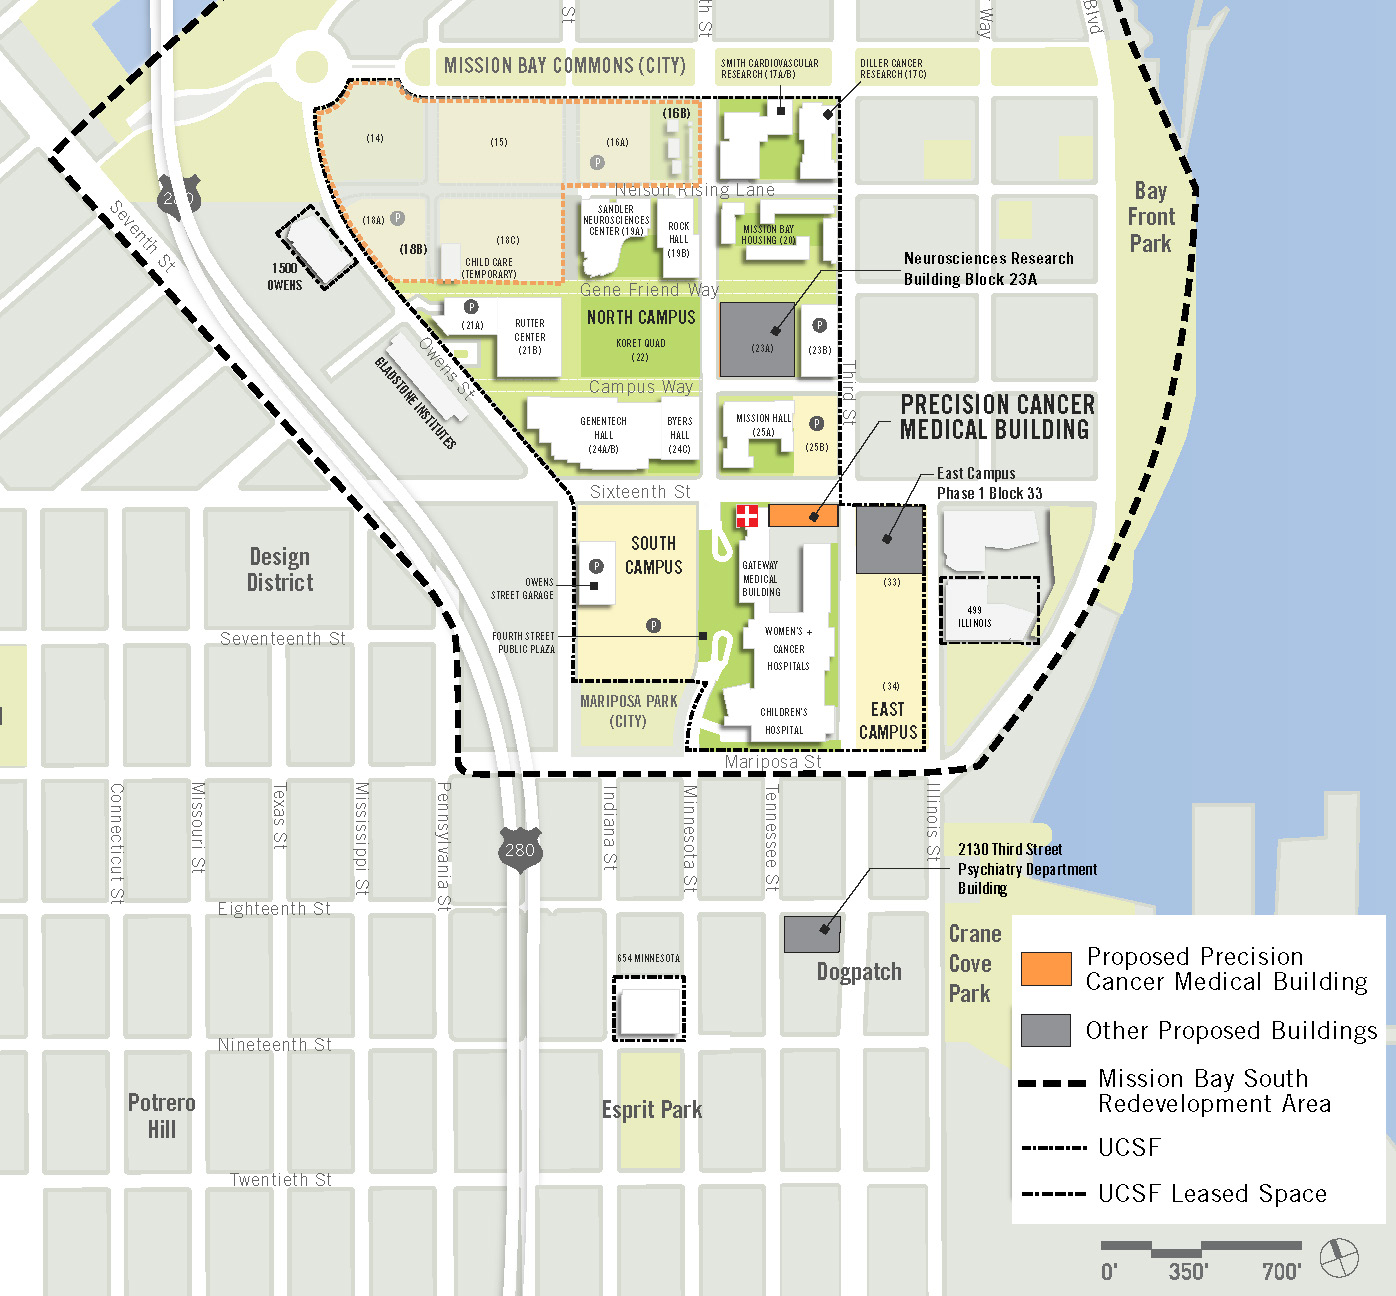 Location of PCMB at UCSF Mission Bay